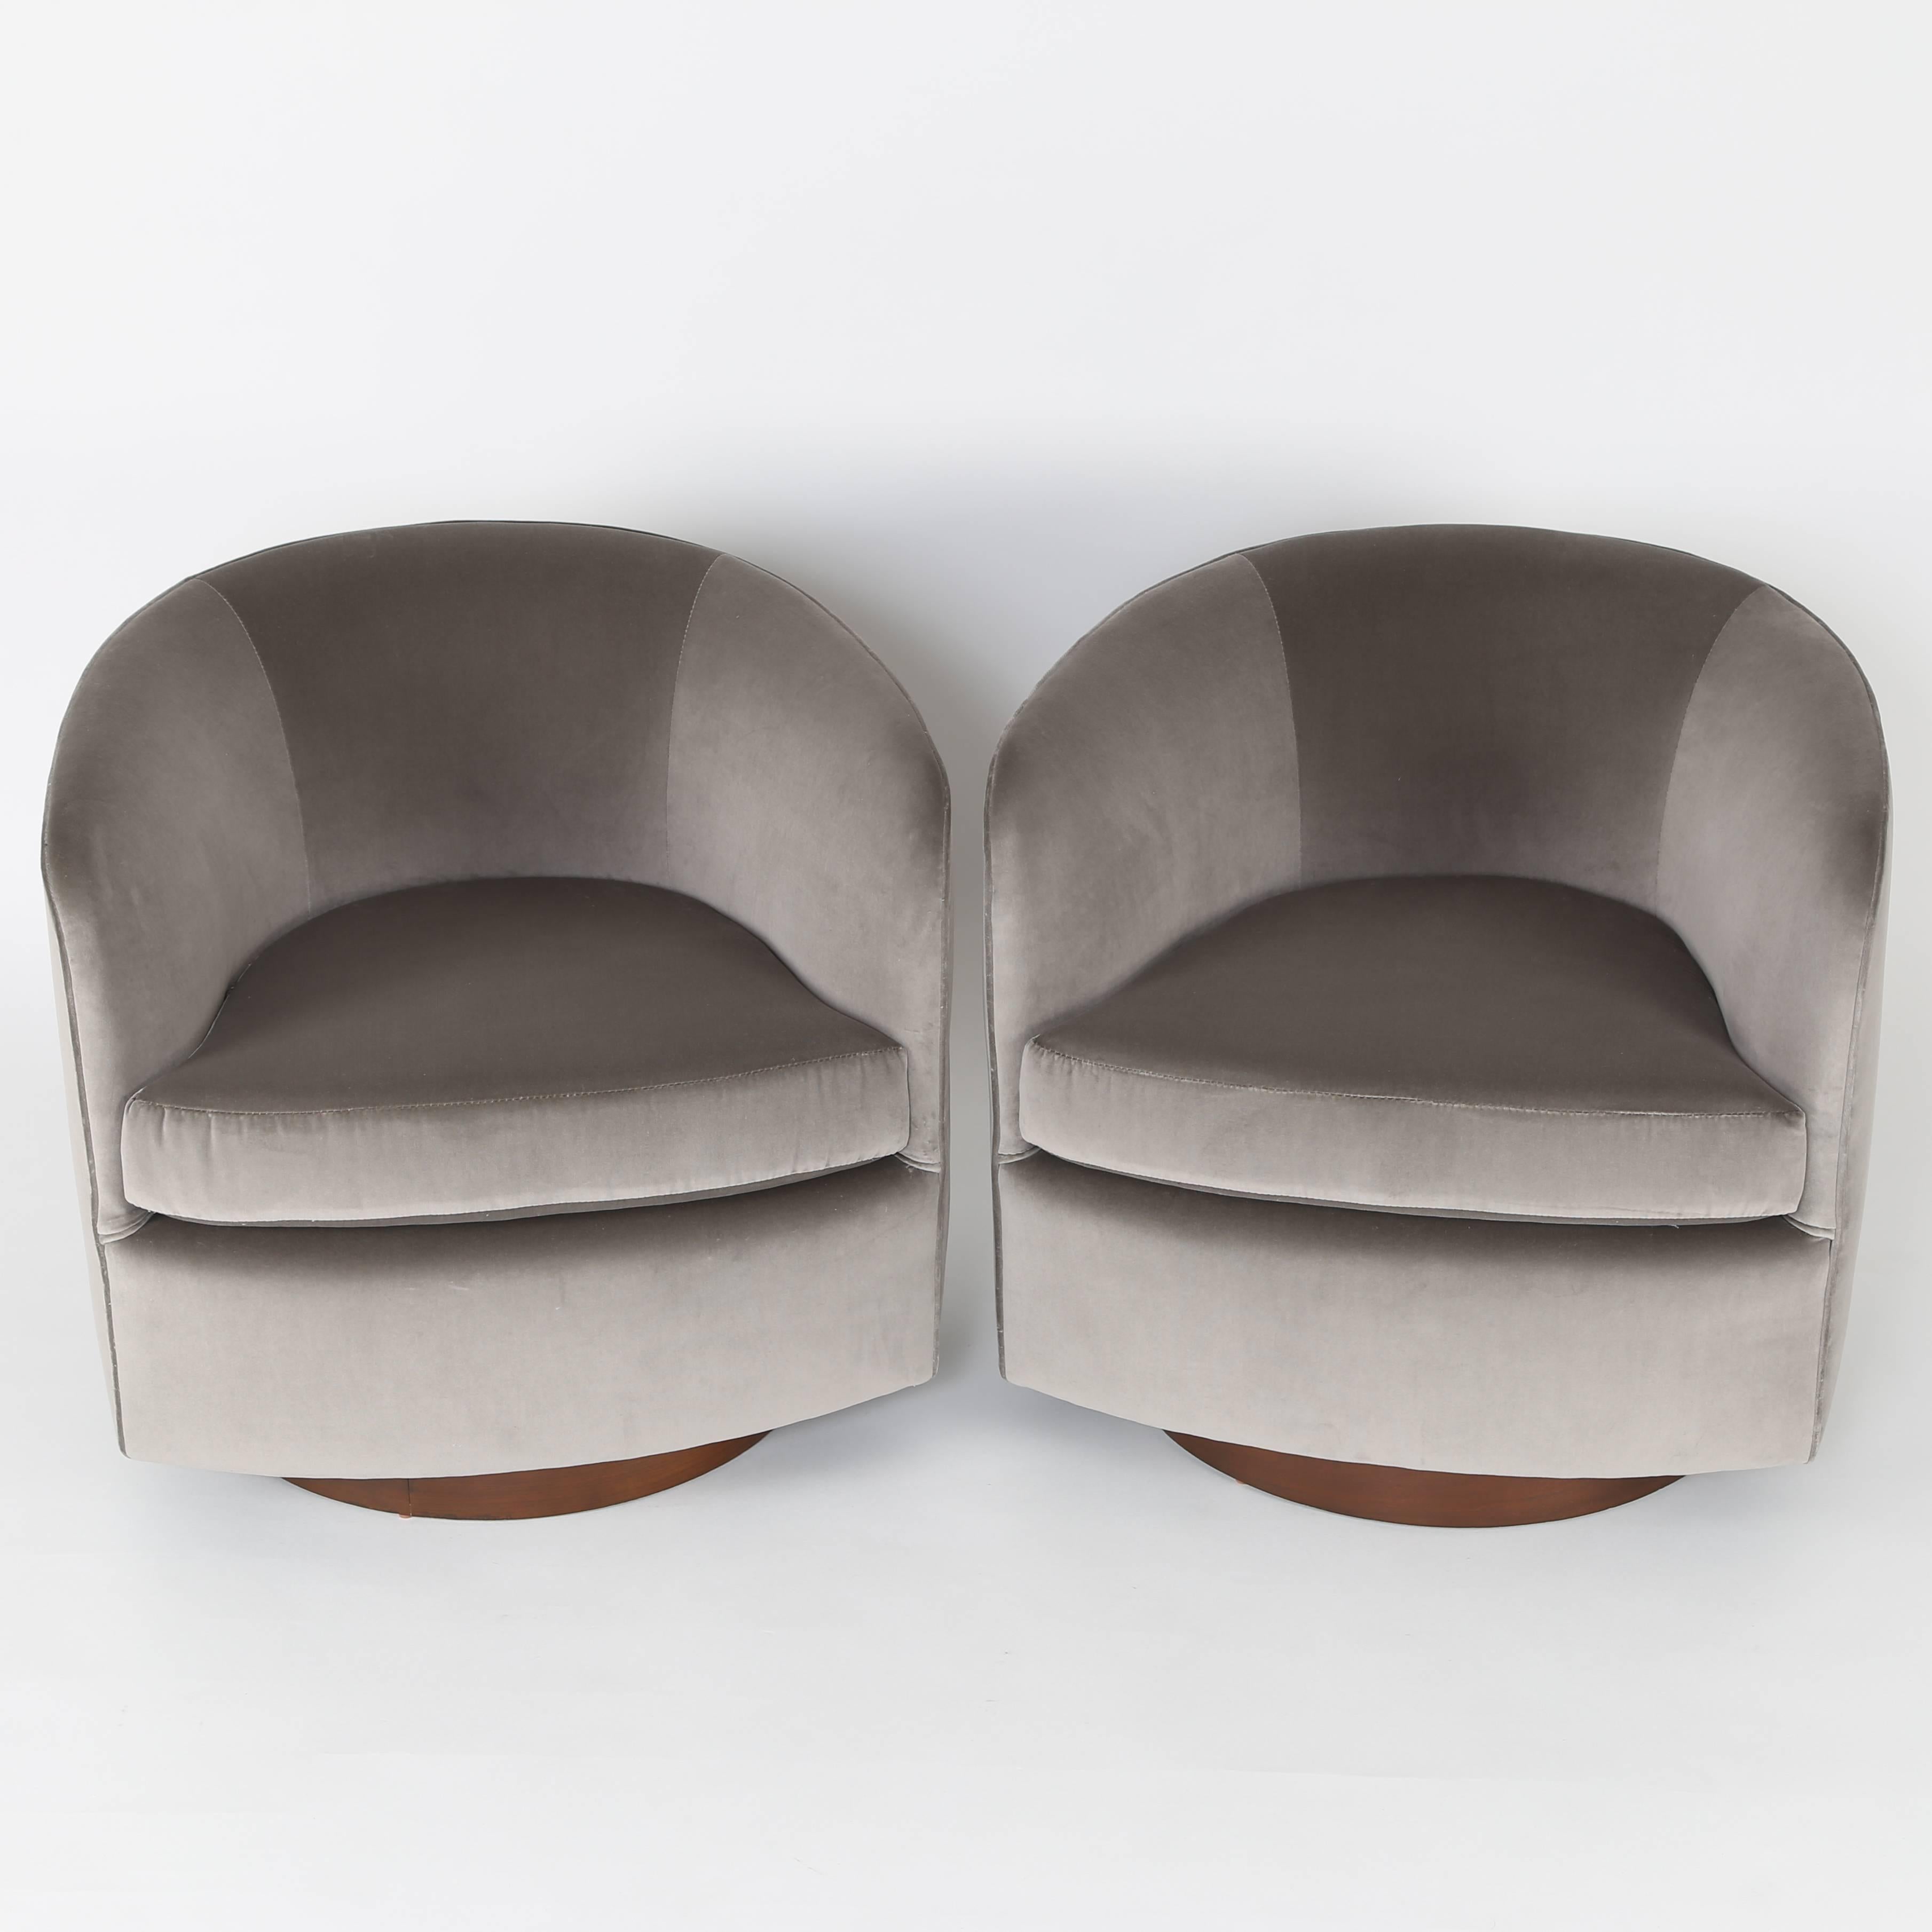 Chic and versatile pair of tilt and swivel armchairs by Milo Baughman for Thayer Coggin. These comfortable chairs rotate on round, walnut-clad bases. This pair has been reupholstered in a luxurious, soft, medium-gray cotton velvet with warm tones.